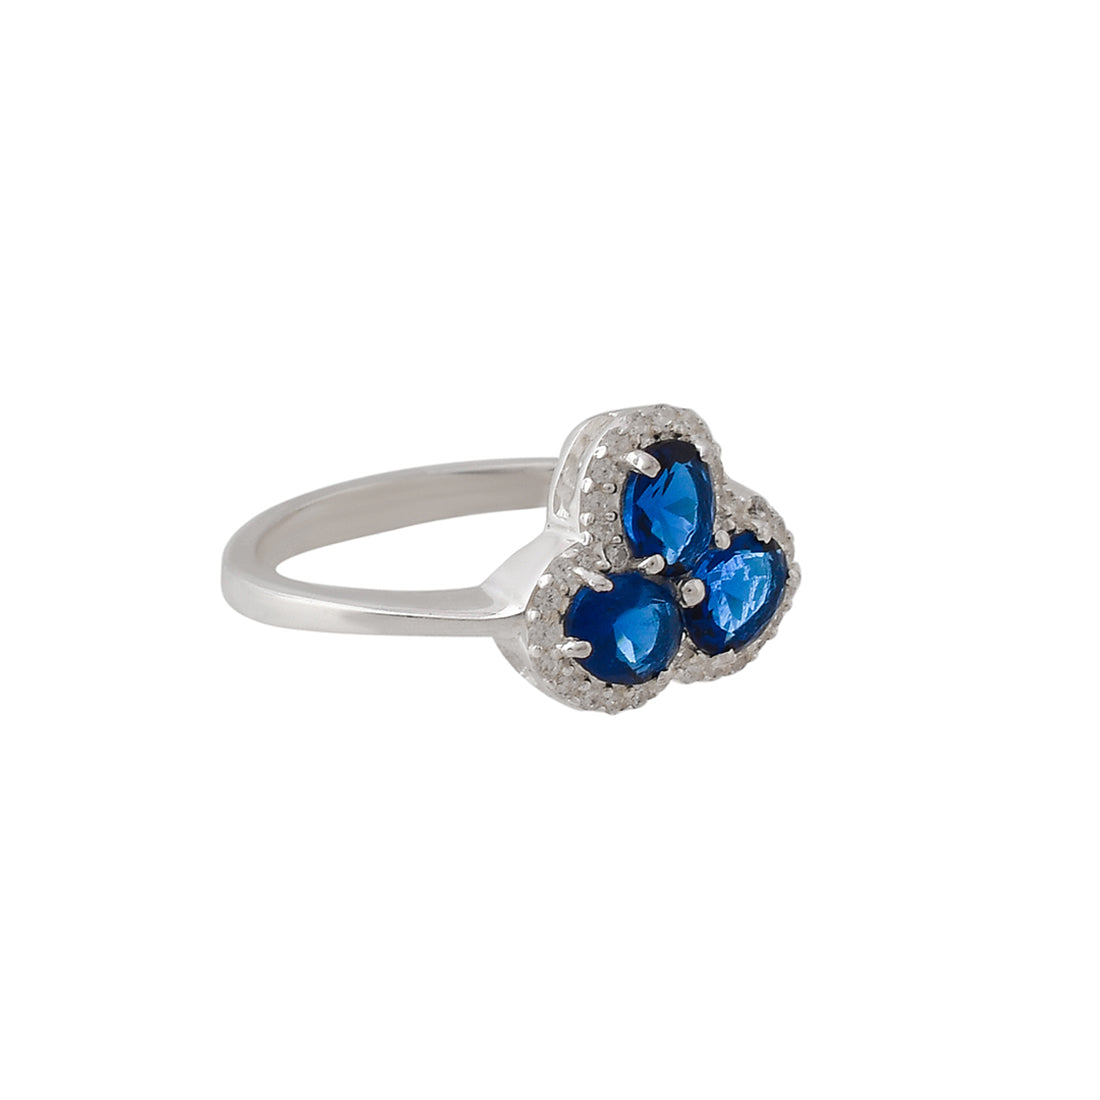 Women's Round Cut Sapphires Cluster Setting Adjustable Sterling Silver Ring - Voylla